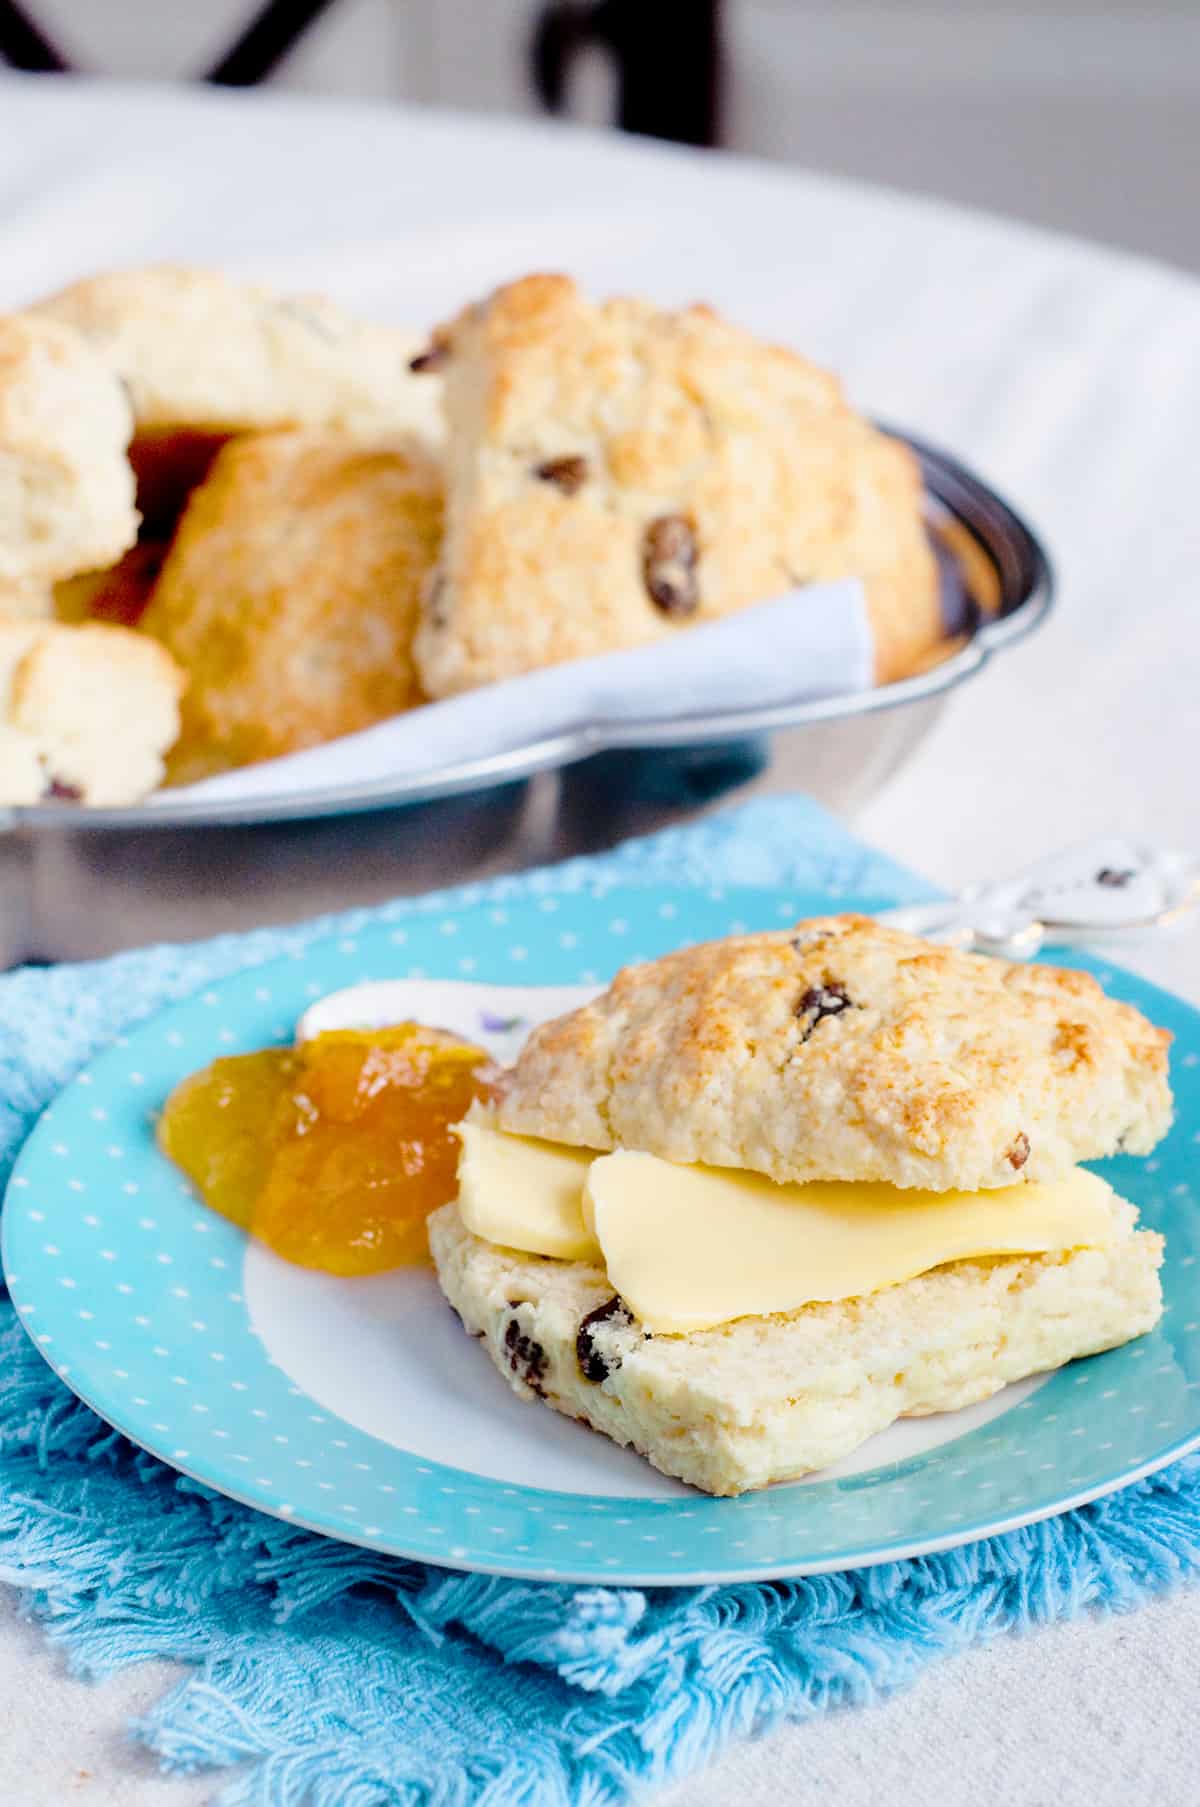 A scone with butter and jam on a decorative plate.